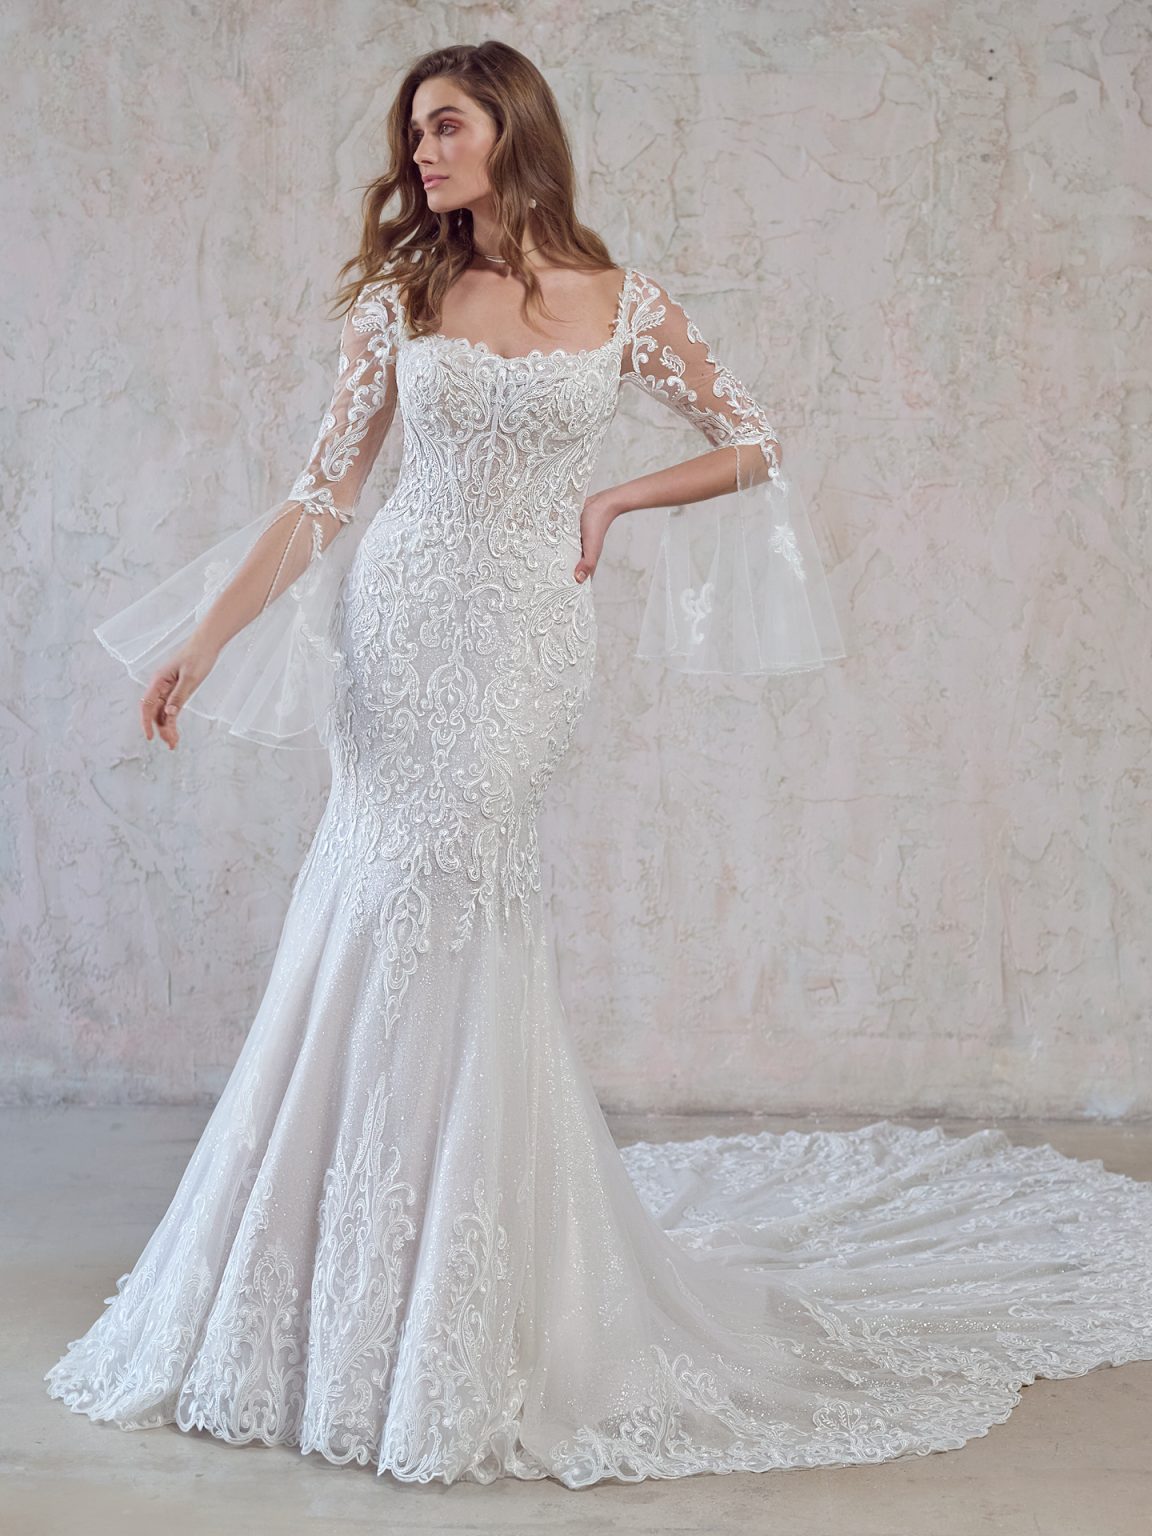 Chic Long Sleeve Wedding Dresses | Maggie Sottero